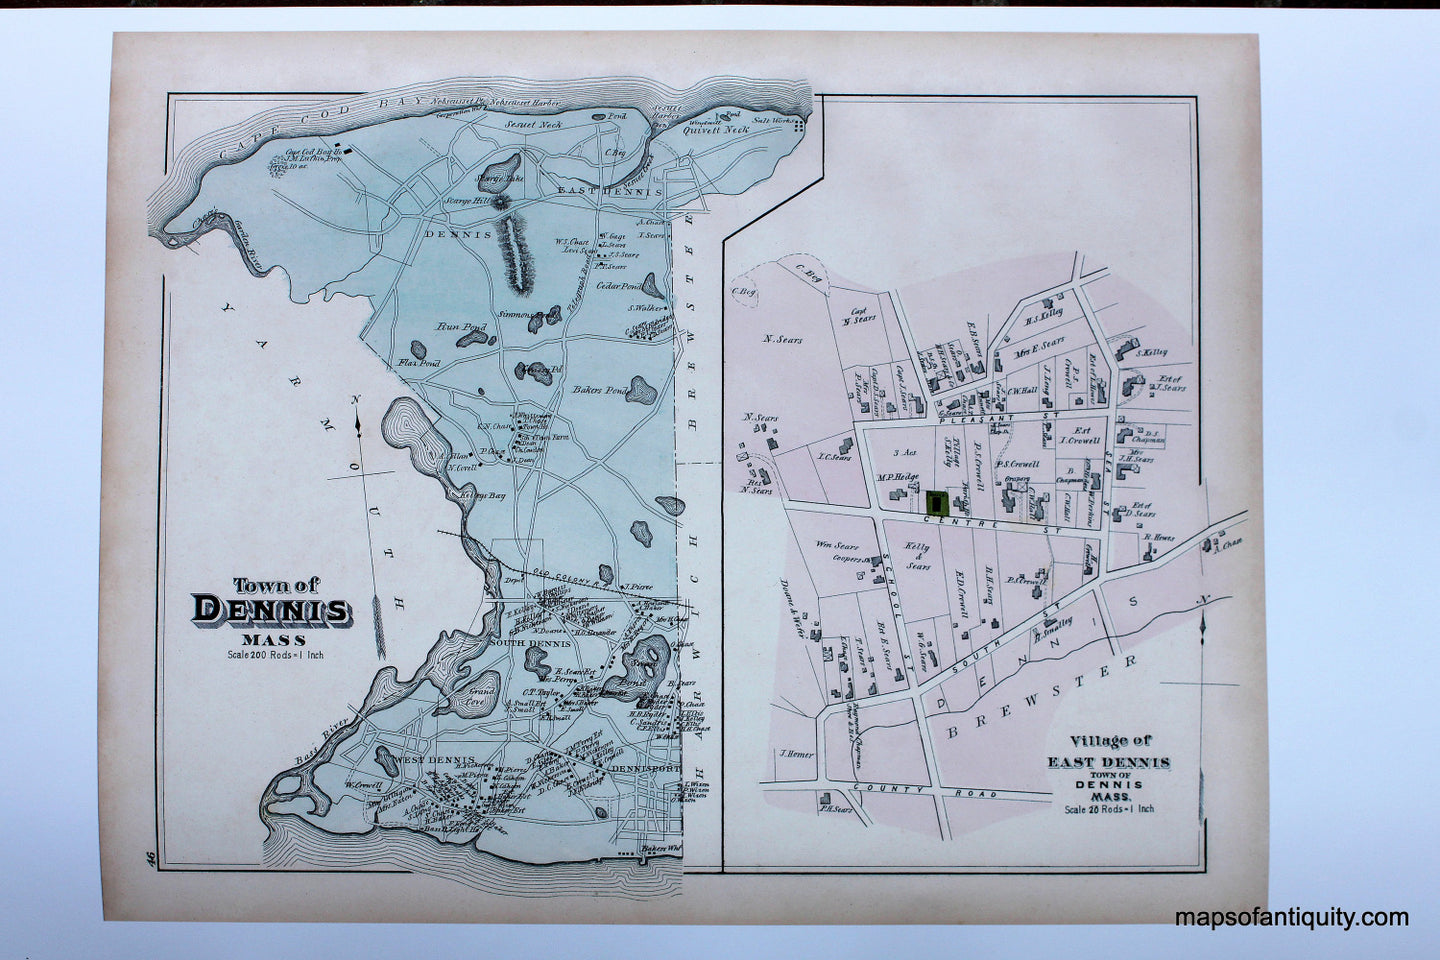 Reproduction-Map-Town-of-Dennis-Village-of-East-Dennis-p.-46-Town-and-Village-Maps-Atlas-of-Barnstable-County-Walker-1880.